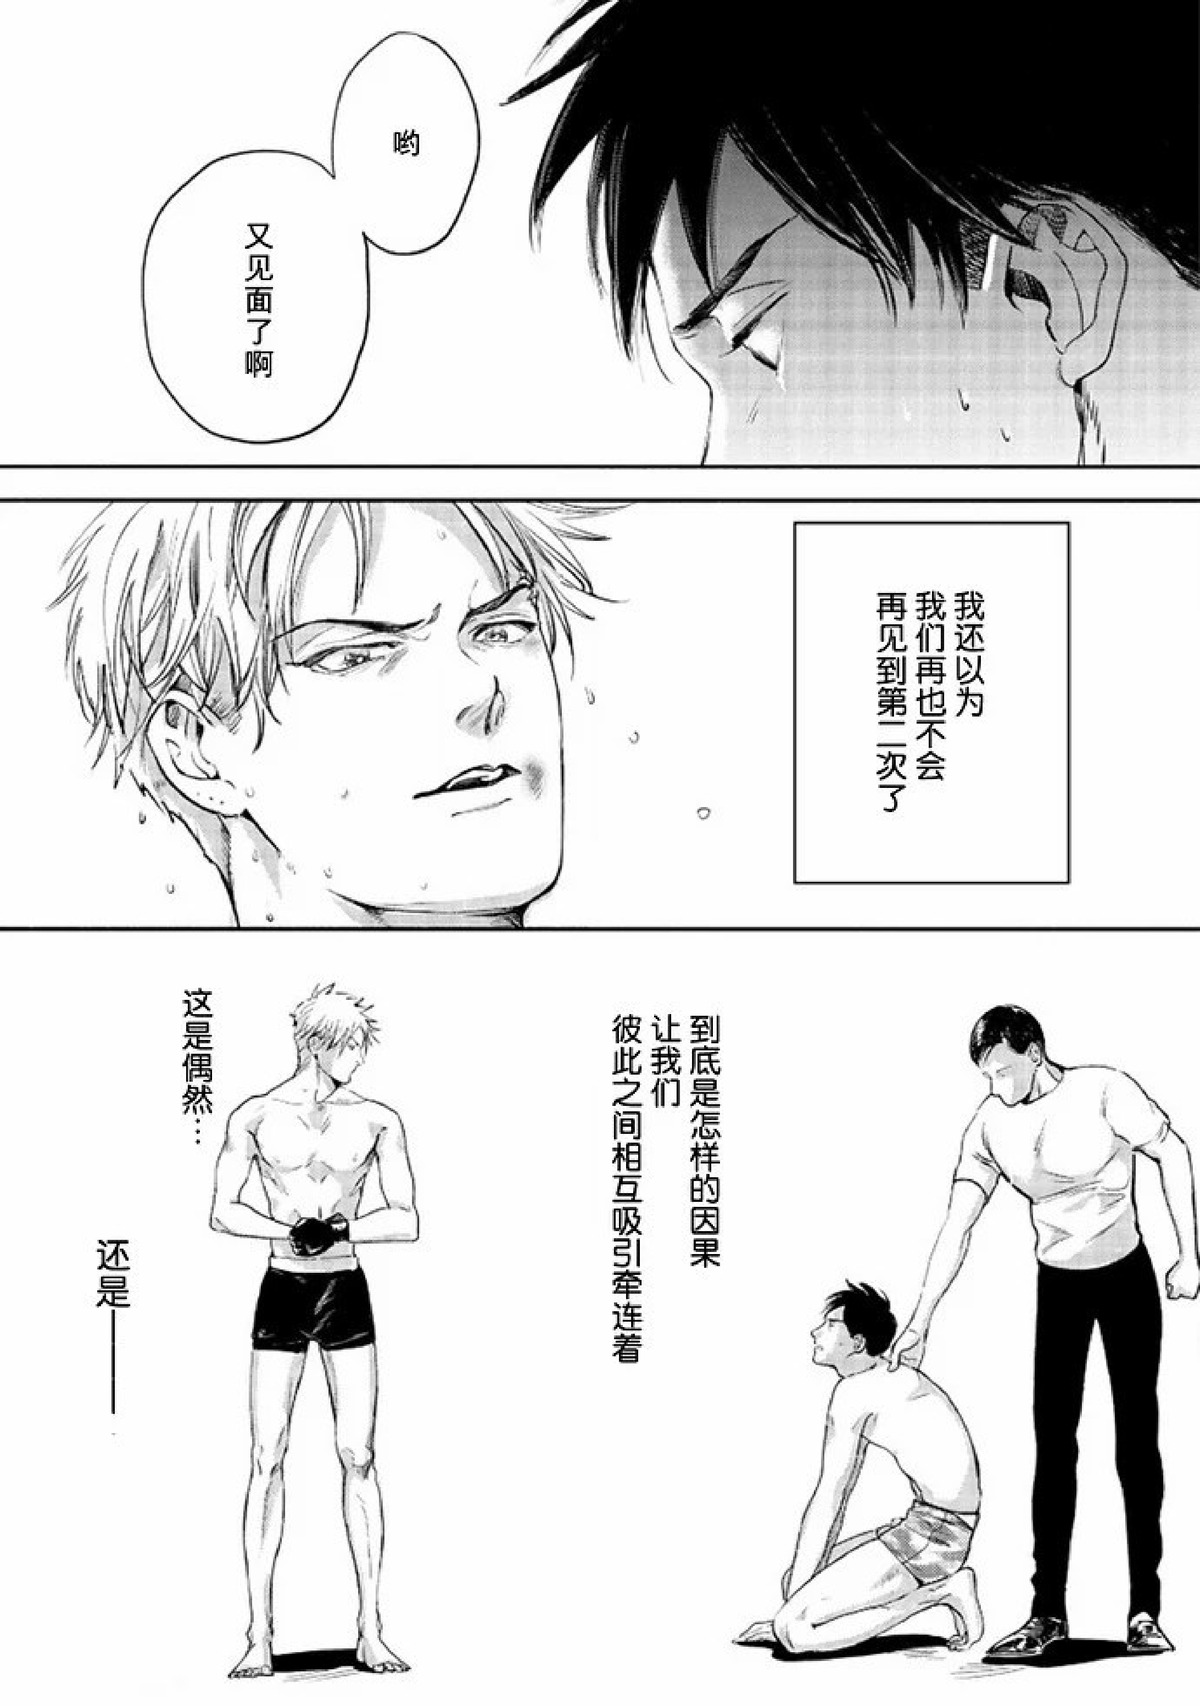 【Two sides of the same coin[腐漫]】漫画-（上卷01-02）章节漫画下拉式图片-56.jpg